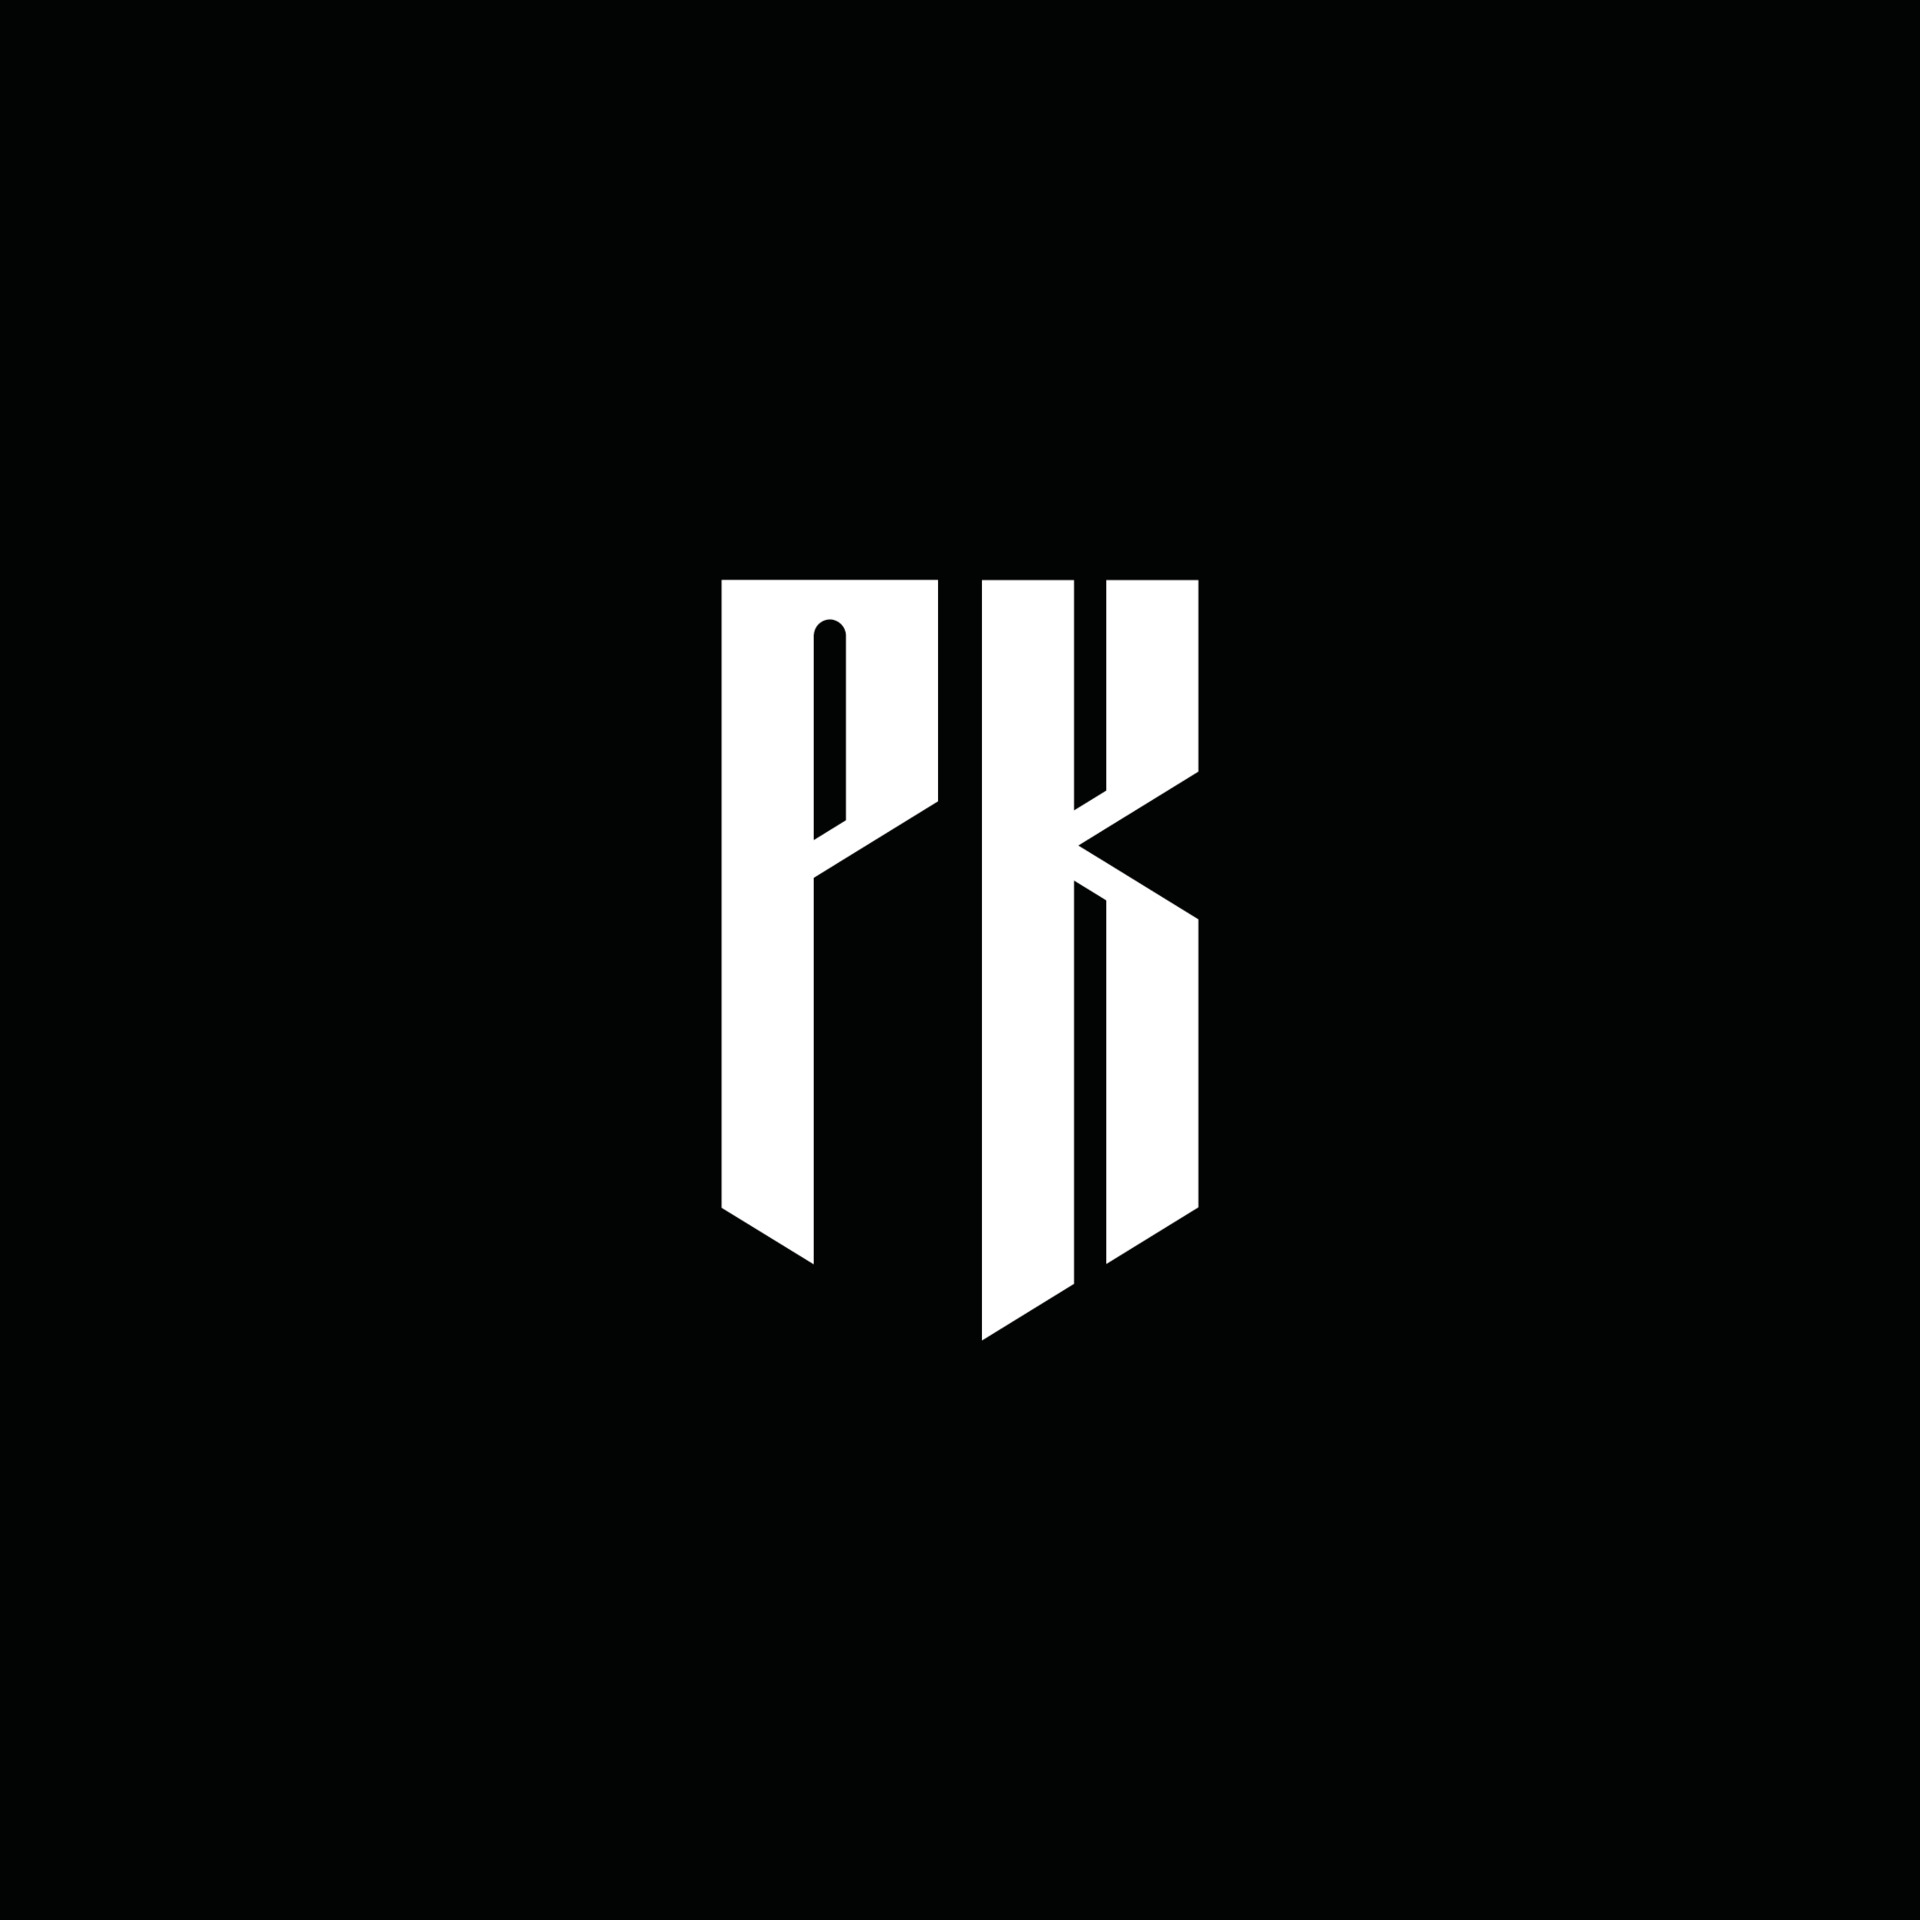 Pk Logo Monogram With Emblem Style Isolated On Black Background Vector Art At Vecteezy